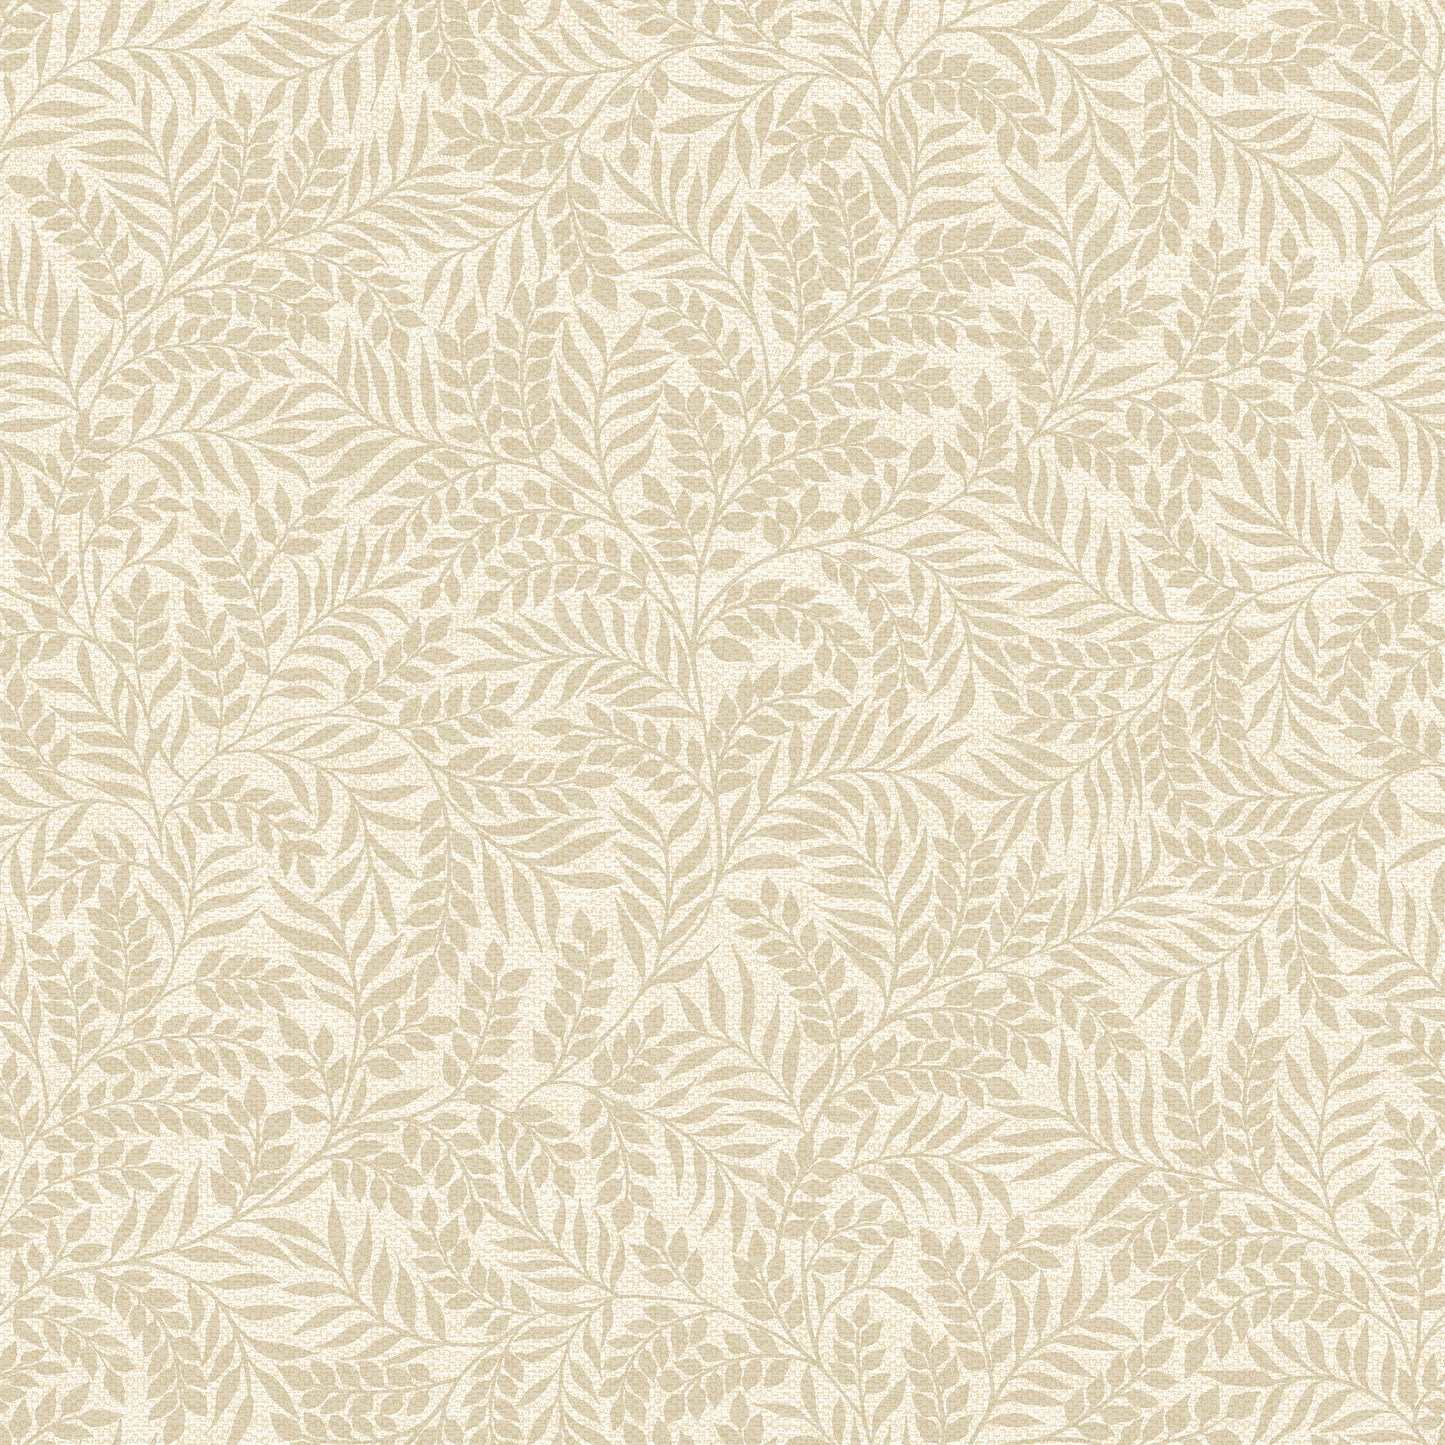 Mini Leaf Beige 13630 by Holden Decor